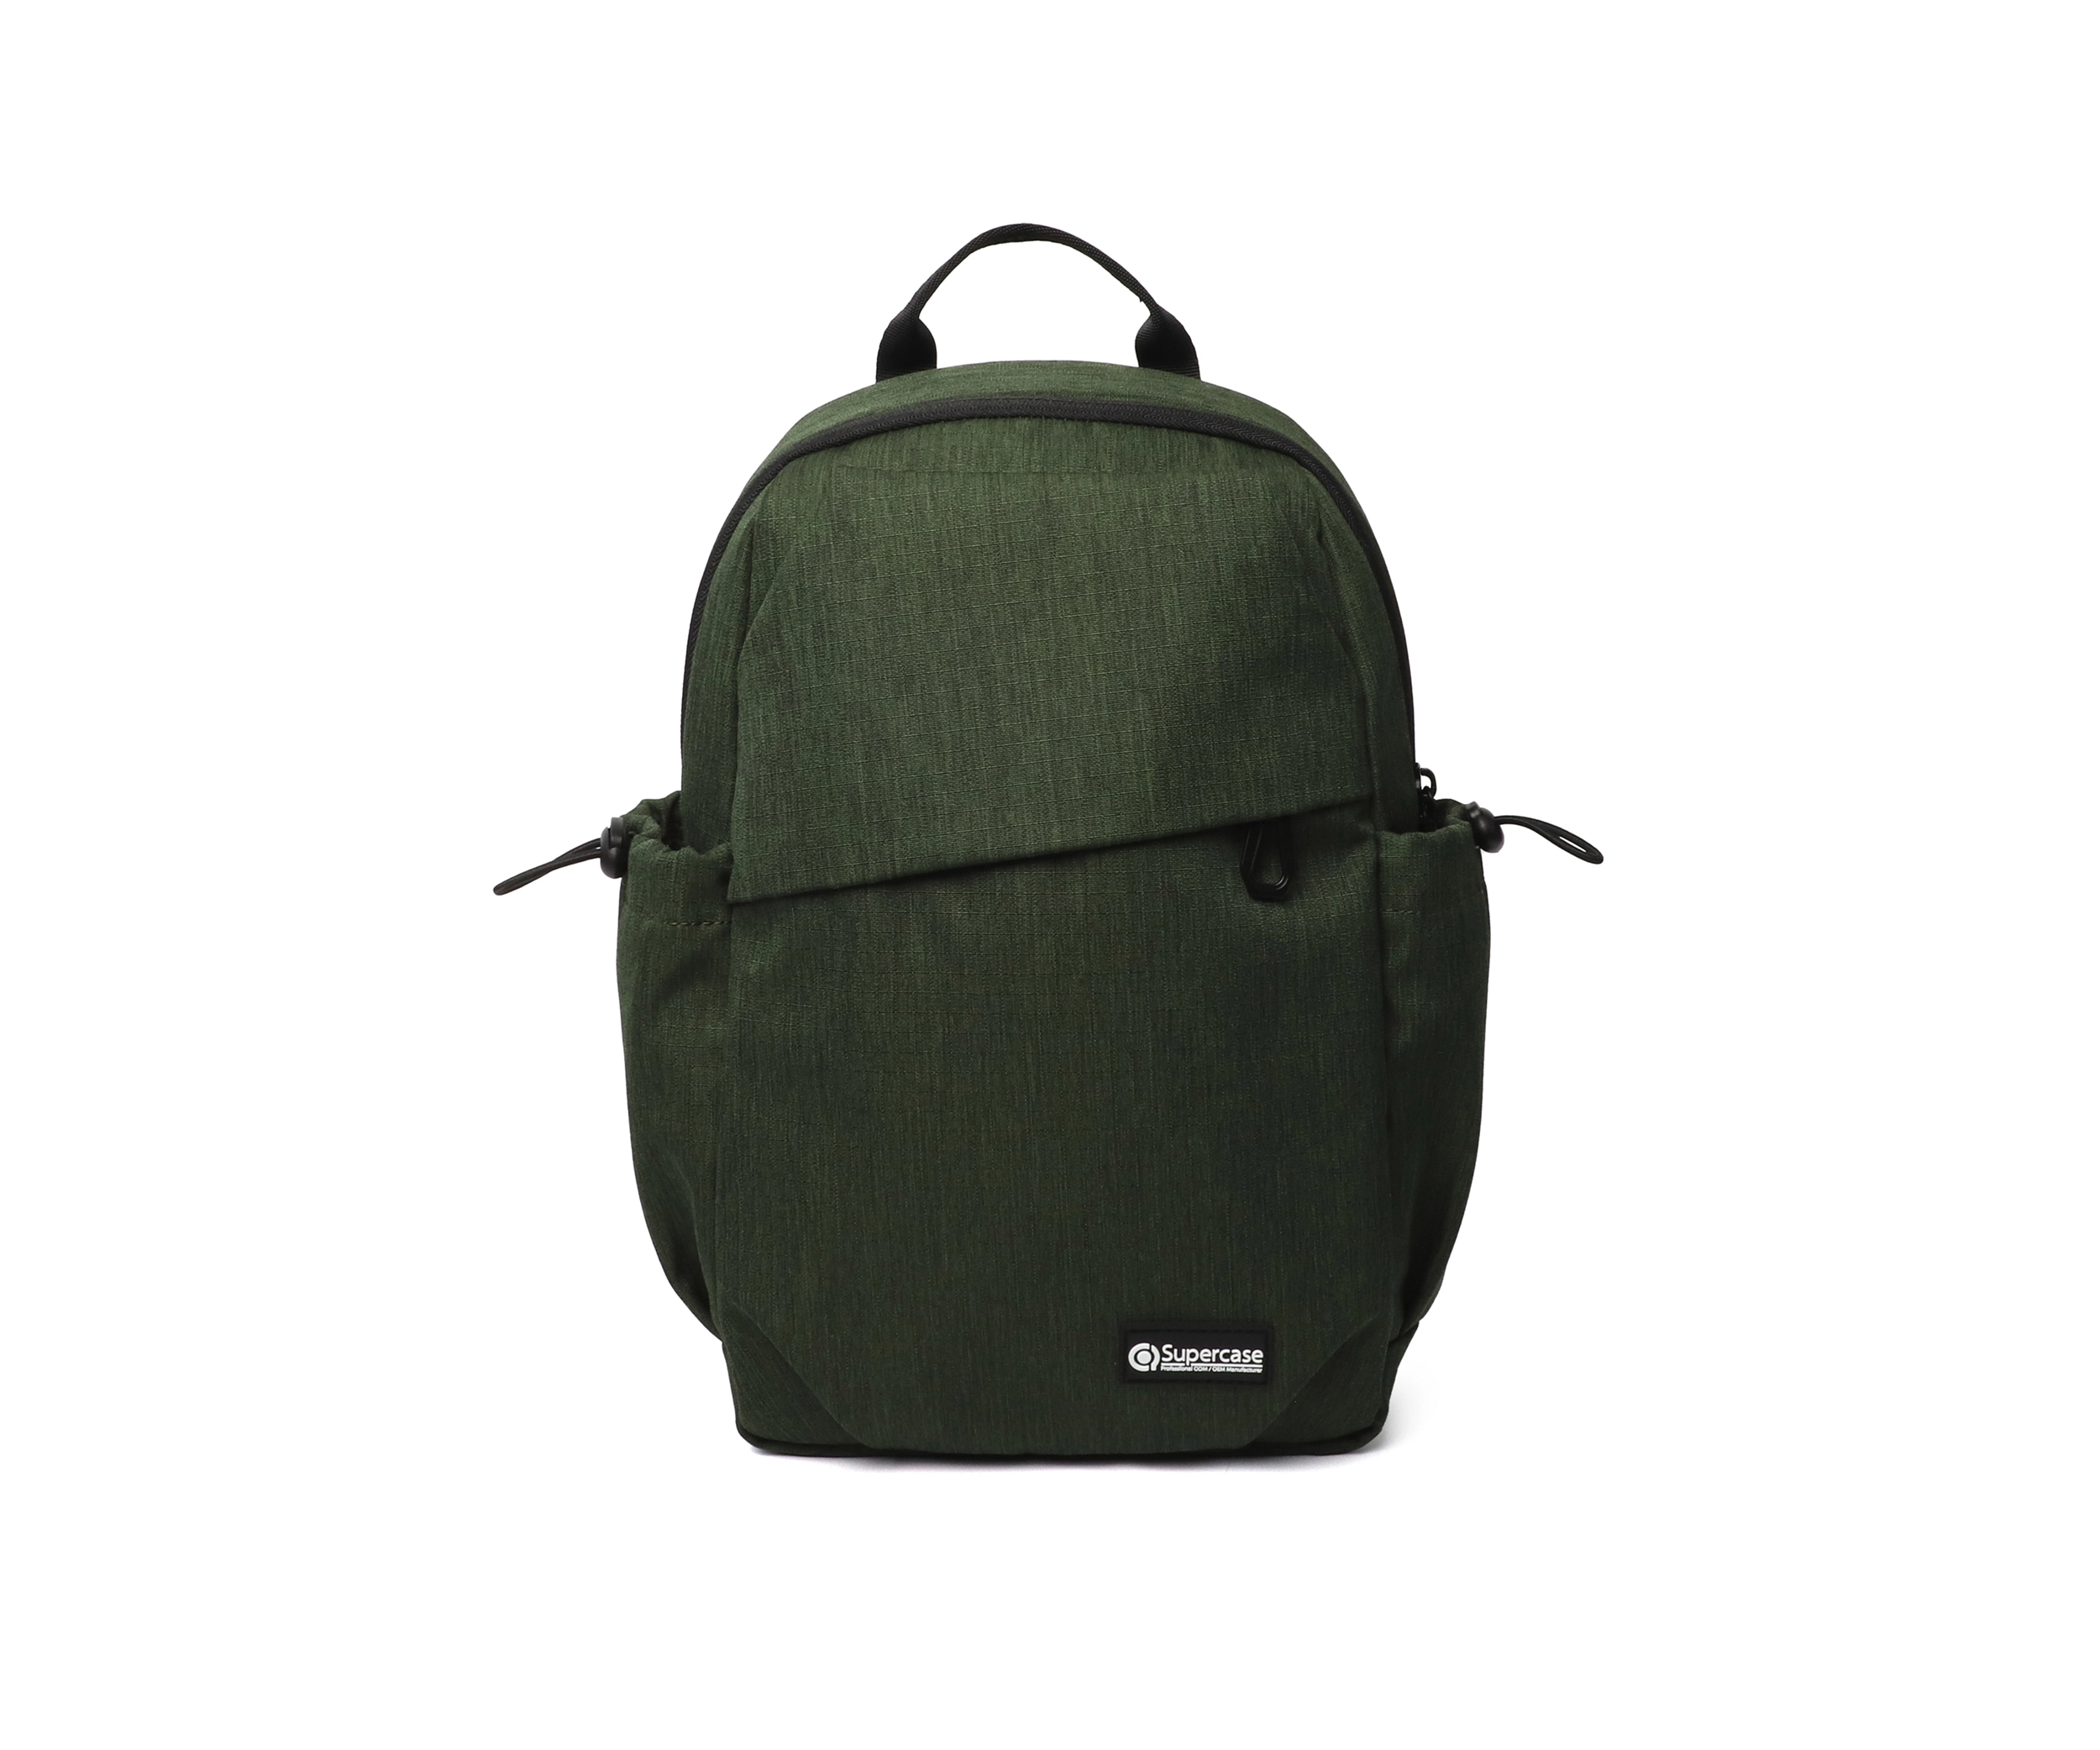 Forest Green Multi-Compartment Backpack